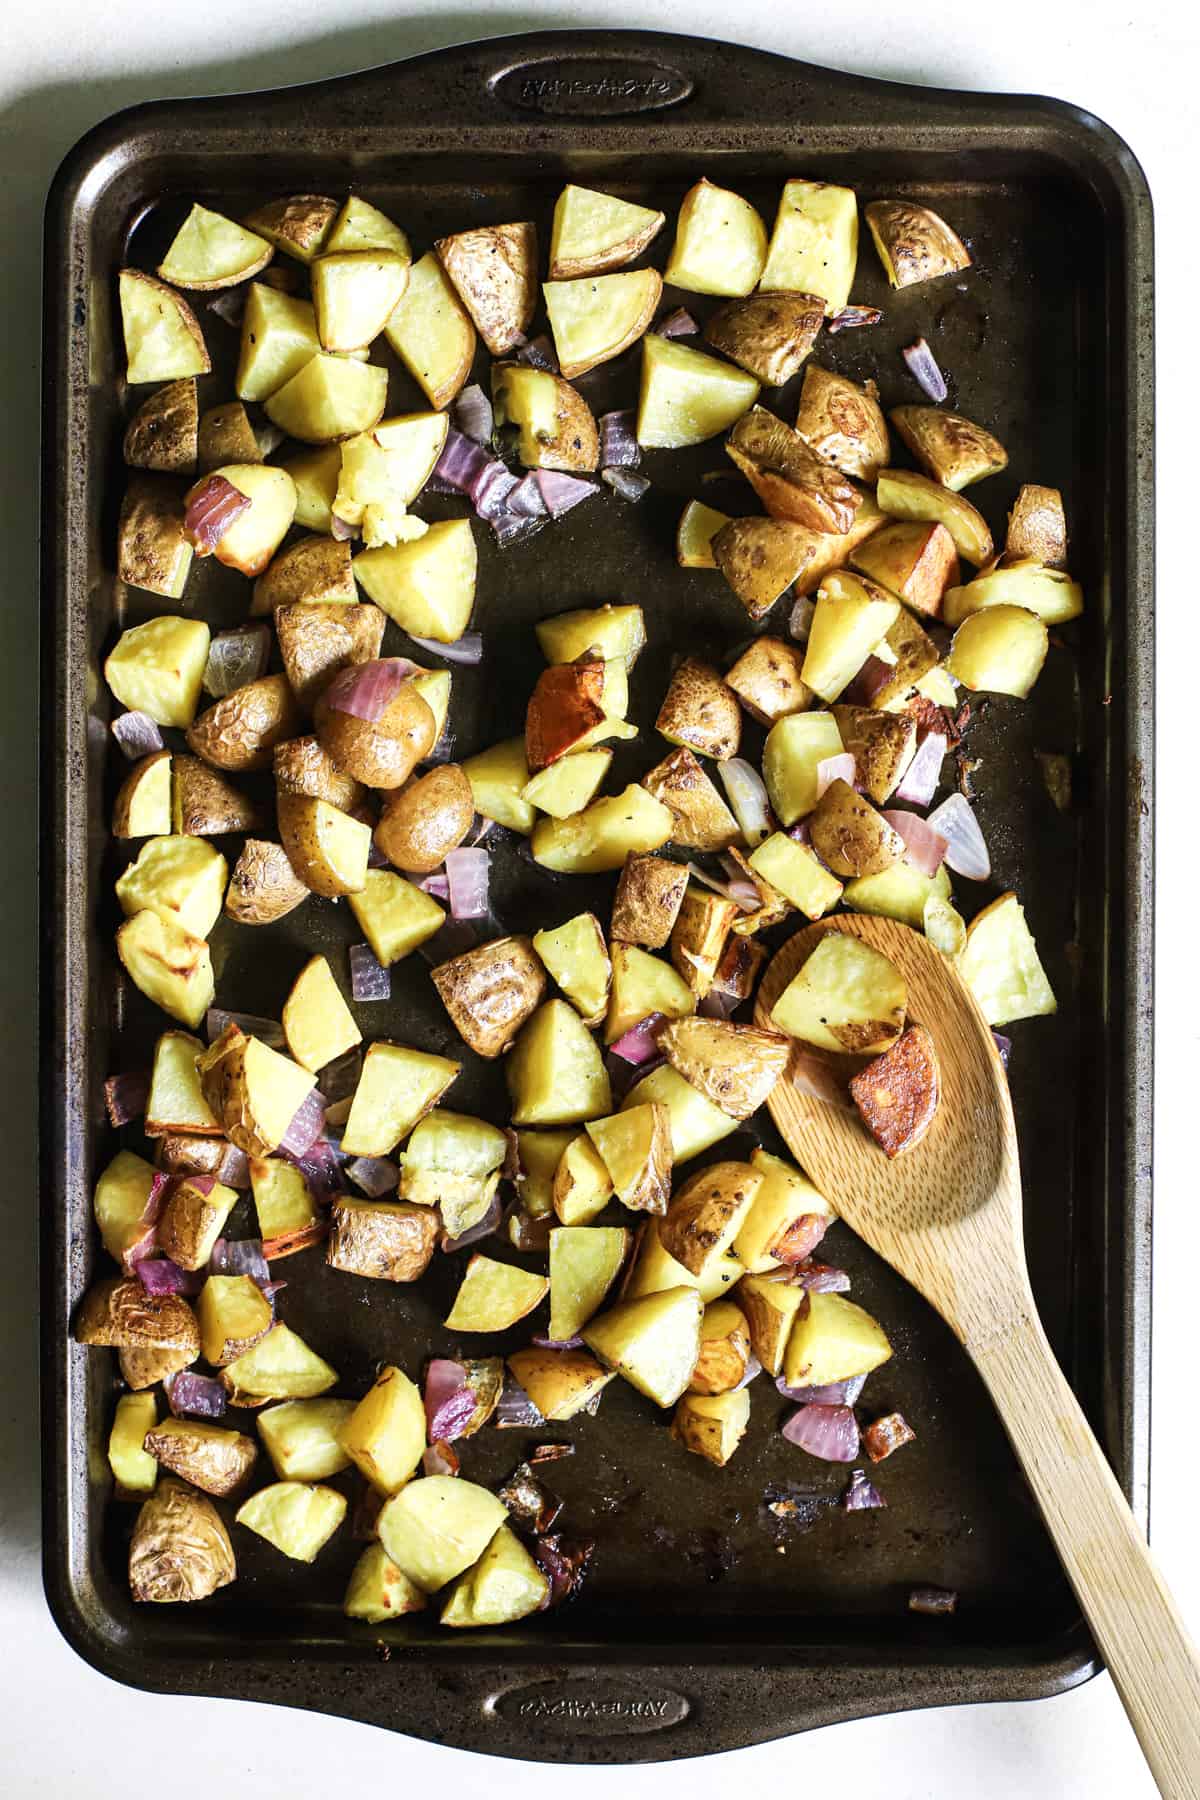 Roasted potatoes and red onions on baking sheet with wooden spoon scooping some potatoes